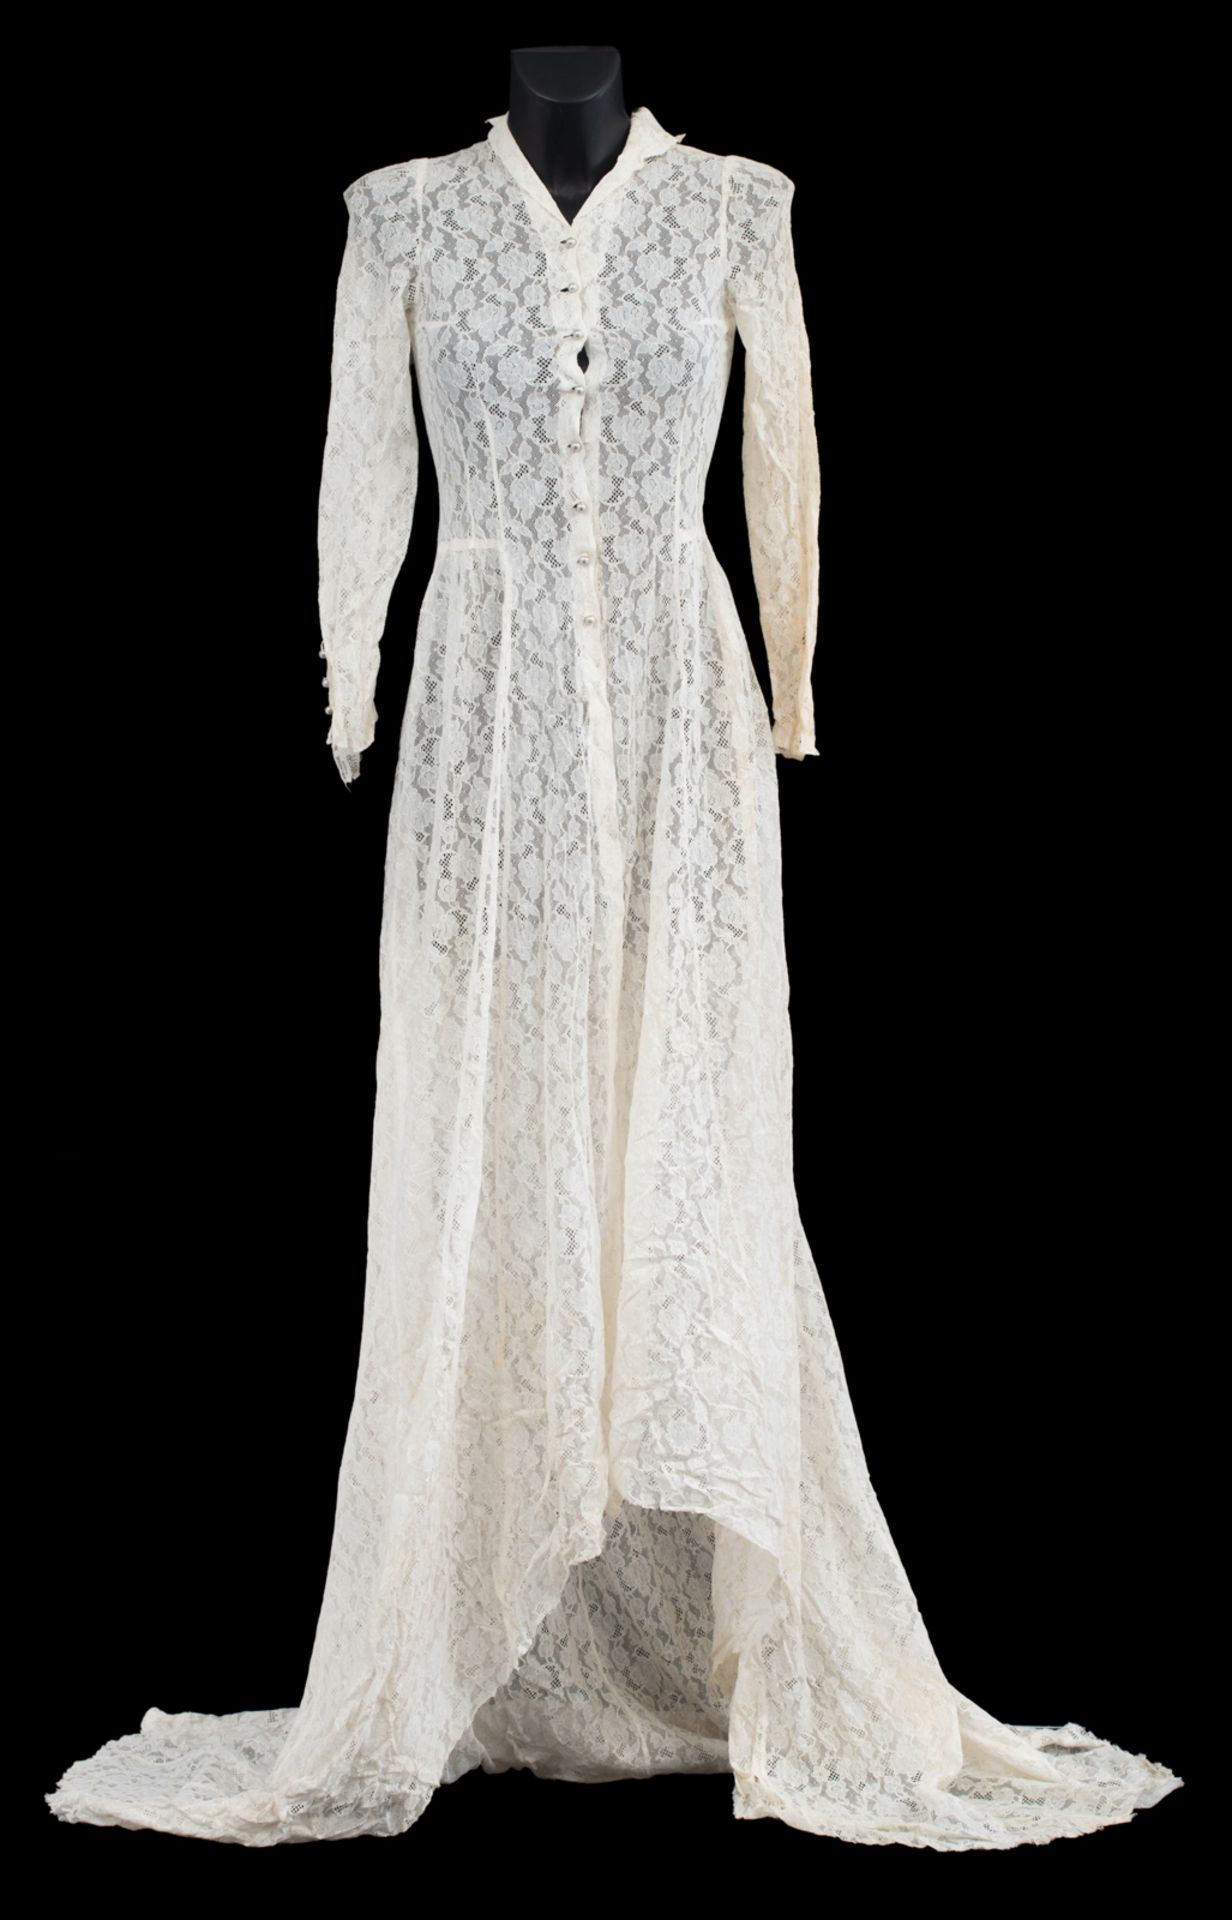 A Bruges wedding dress with floral motifs in bobbin lace; added two collars and a lappet with floral